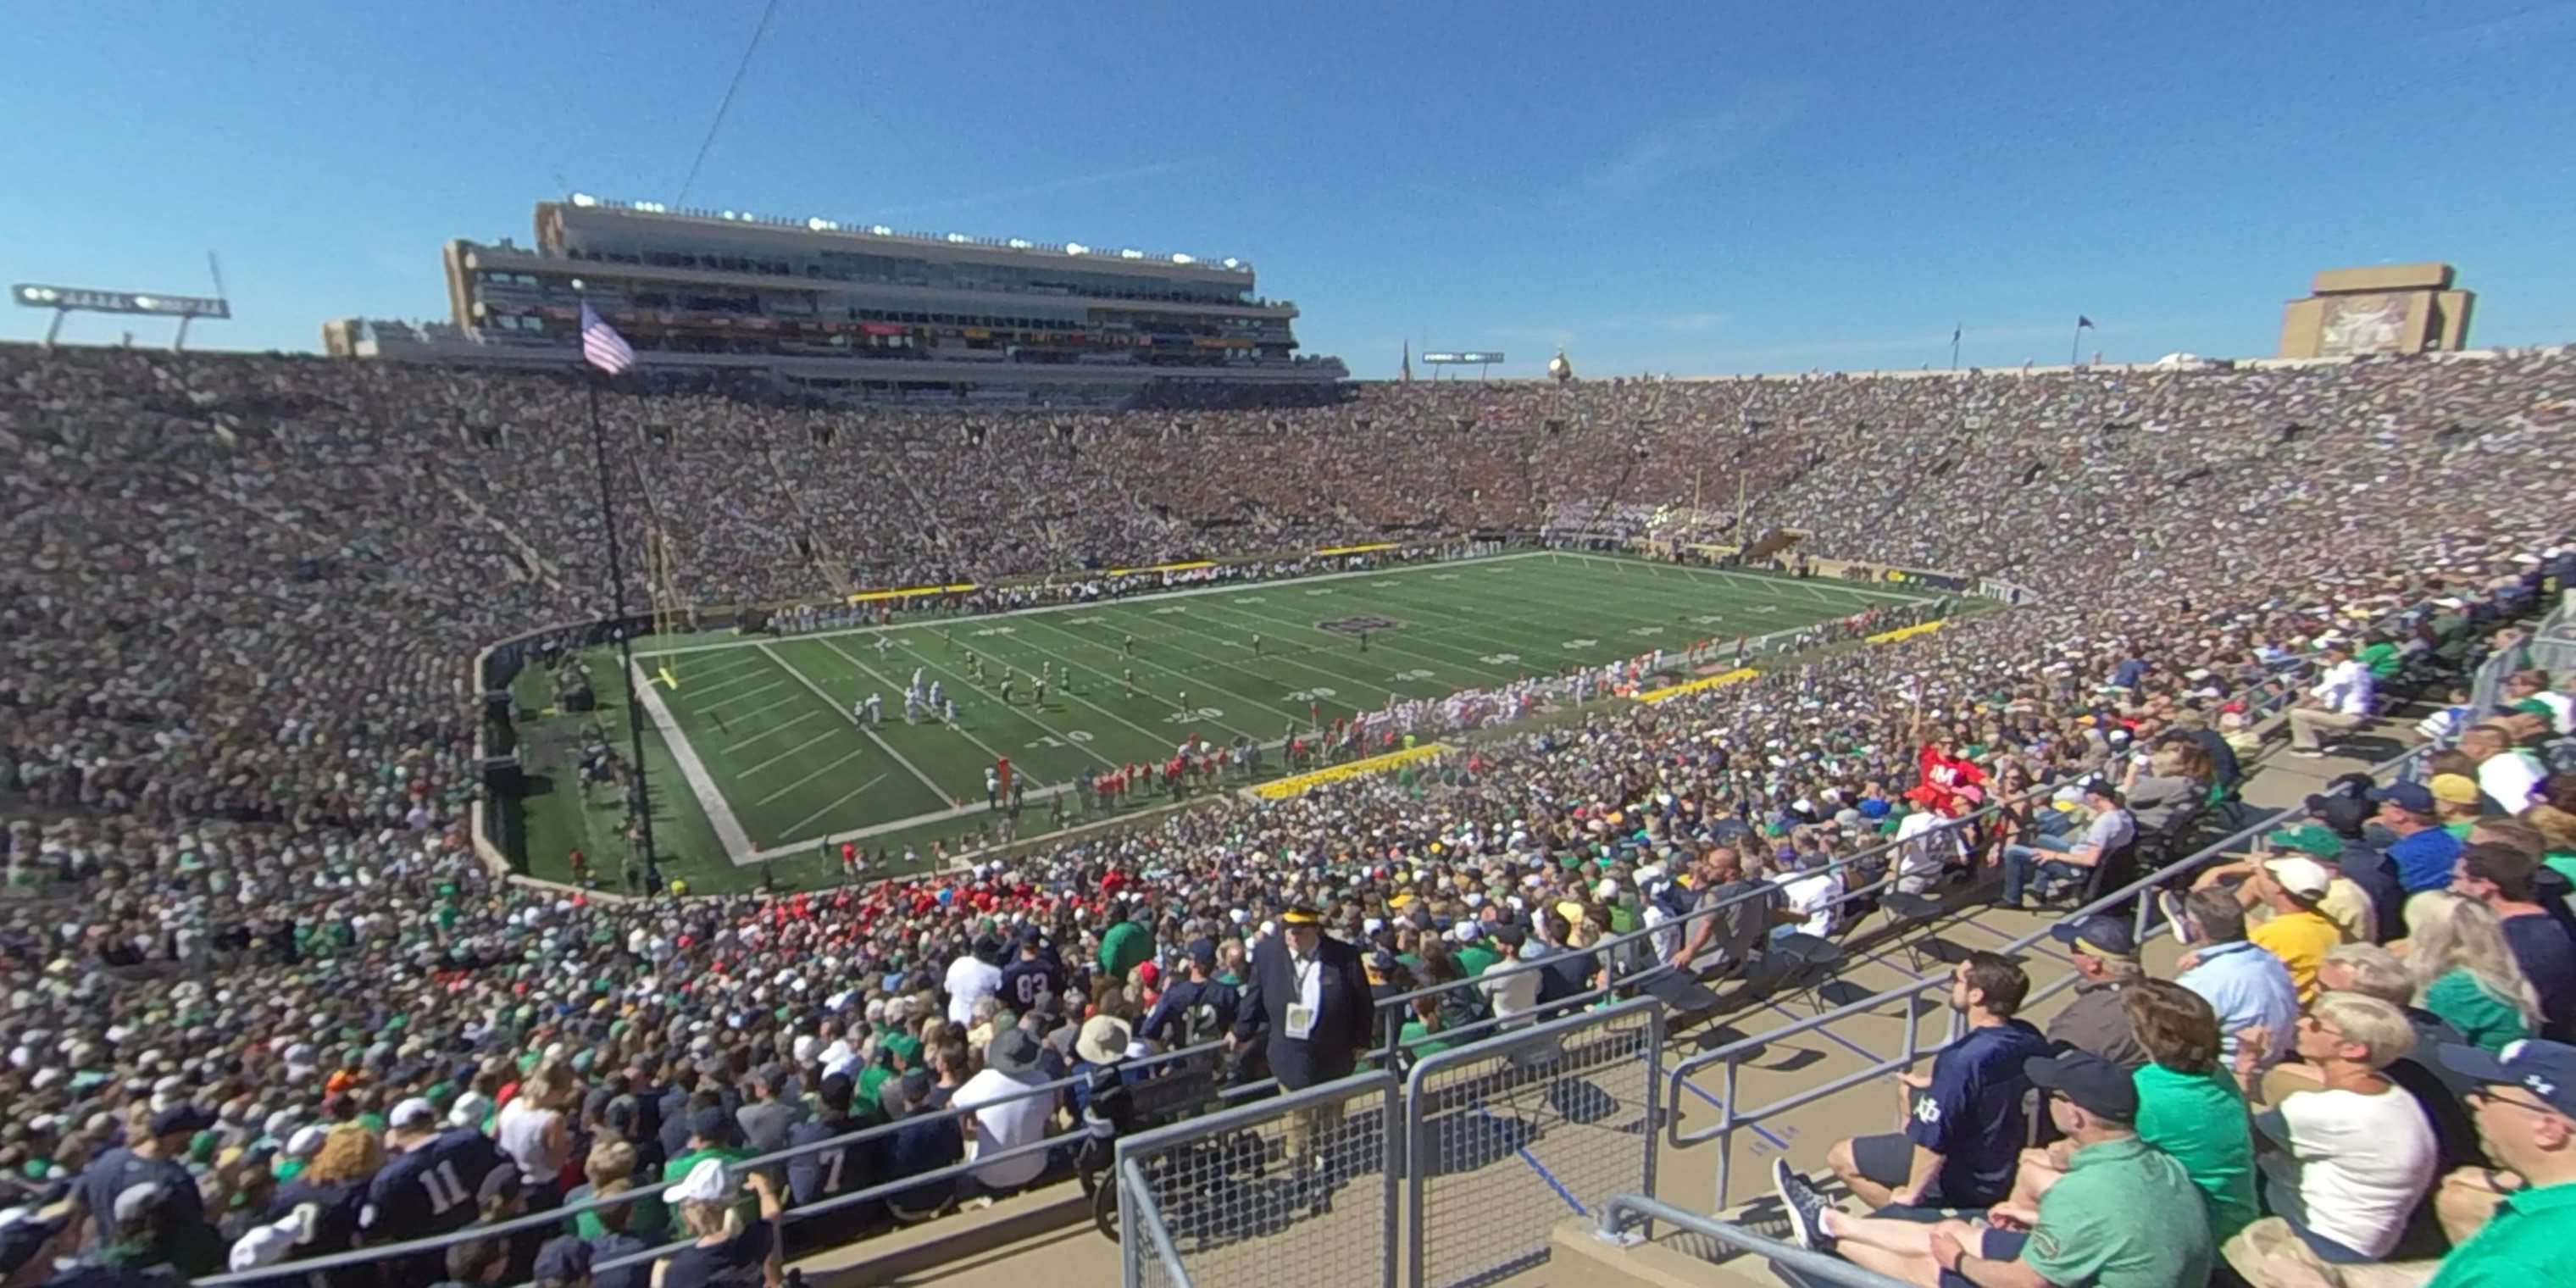 section 113 panoramic seat view  - notre dame stadium